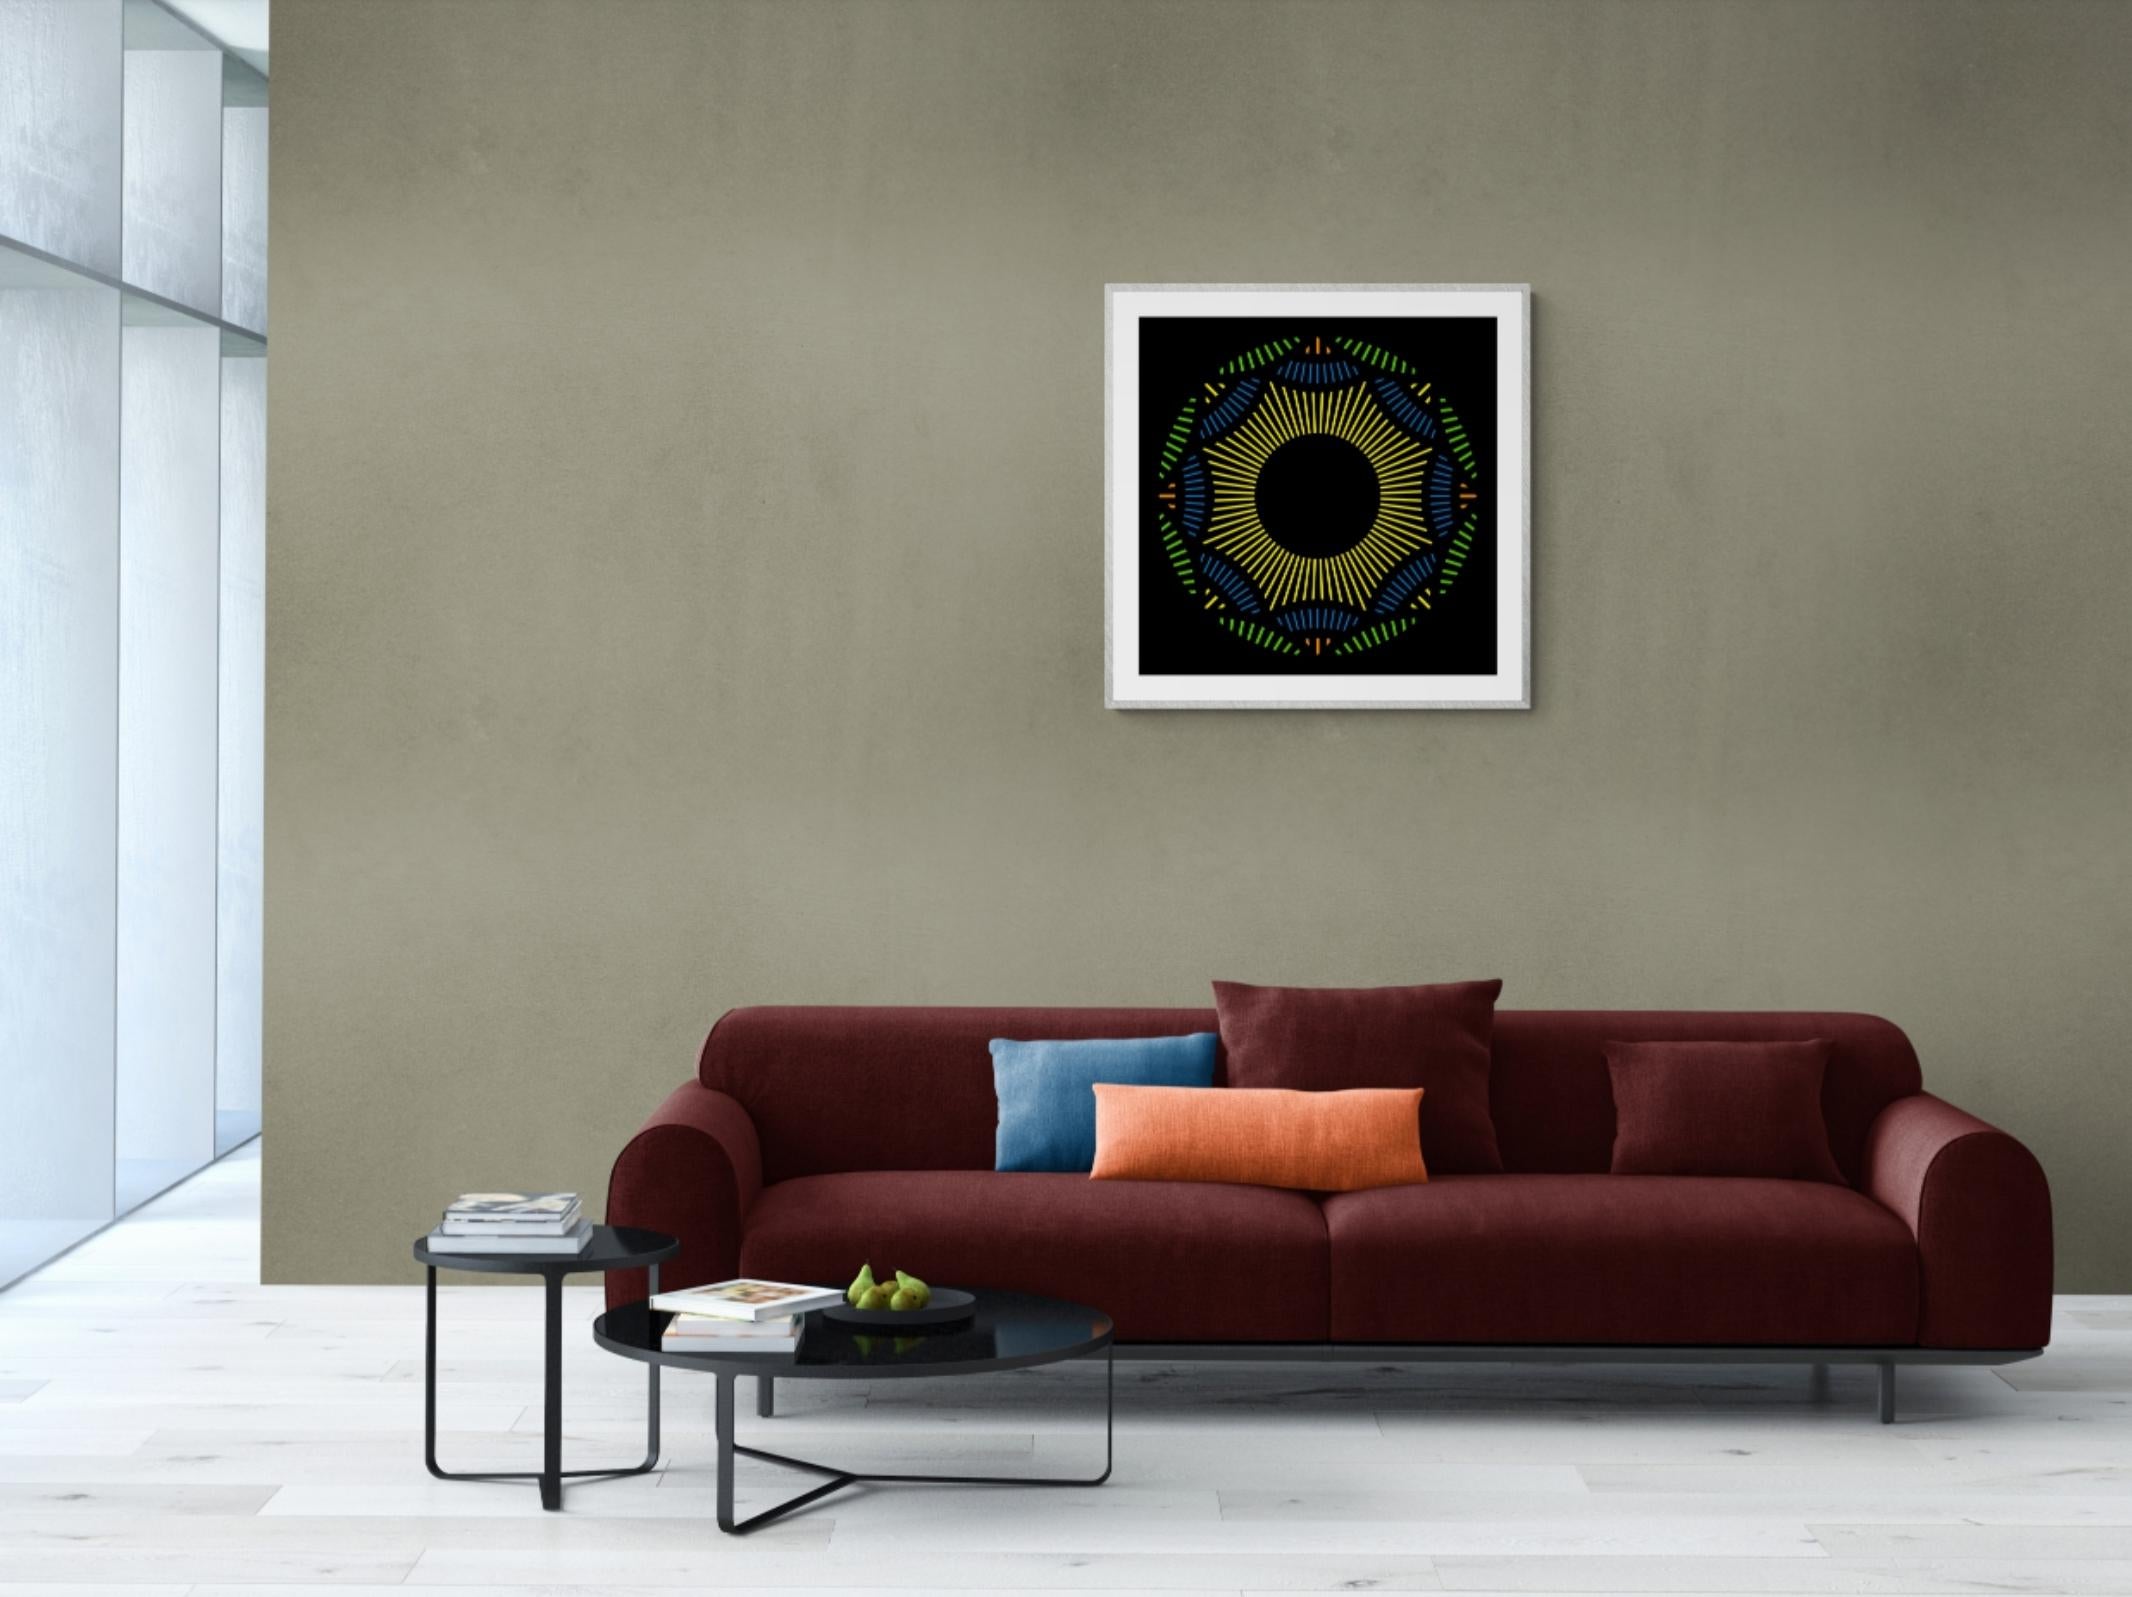 Nebulosa 35 - Black Abstract Print by Julio Campos